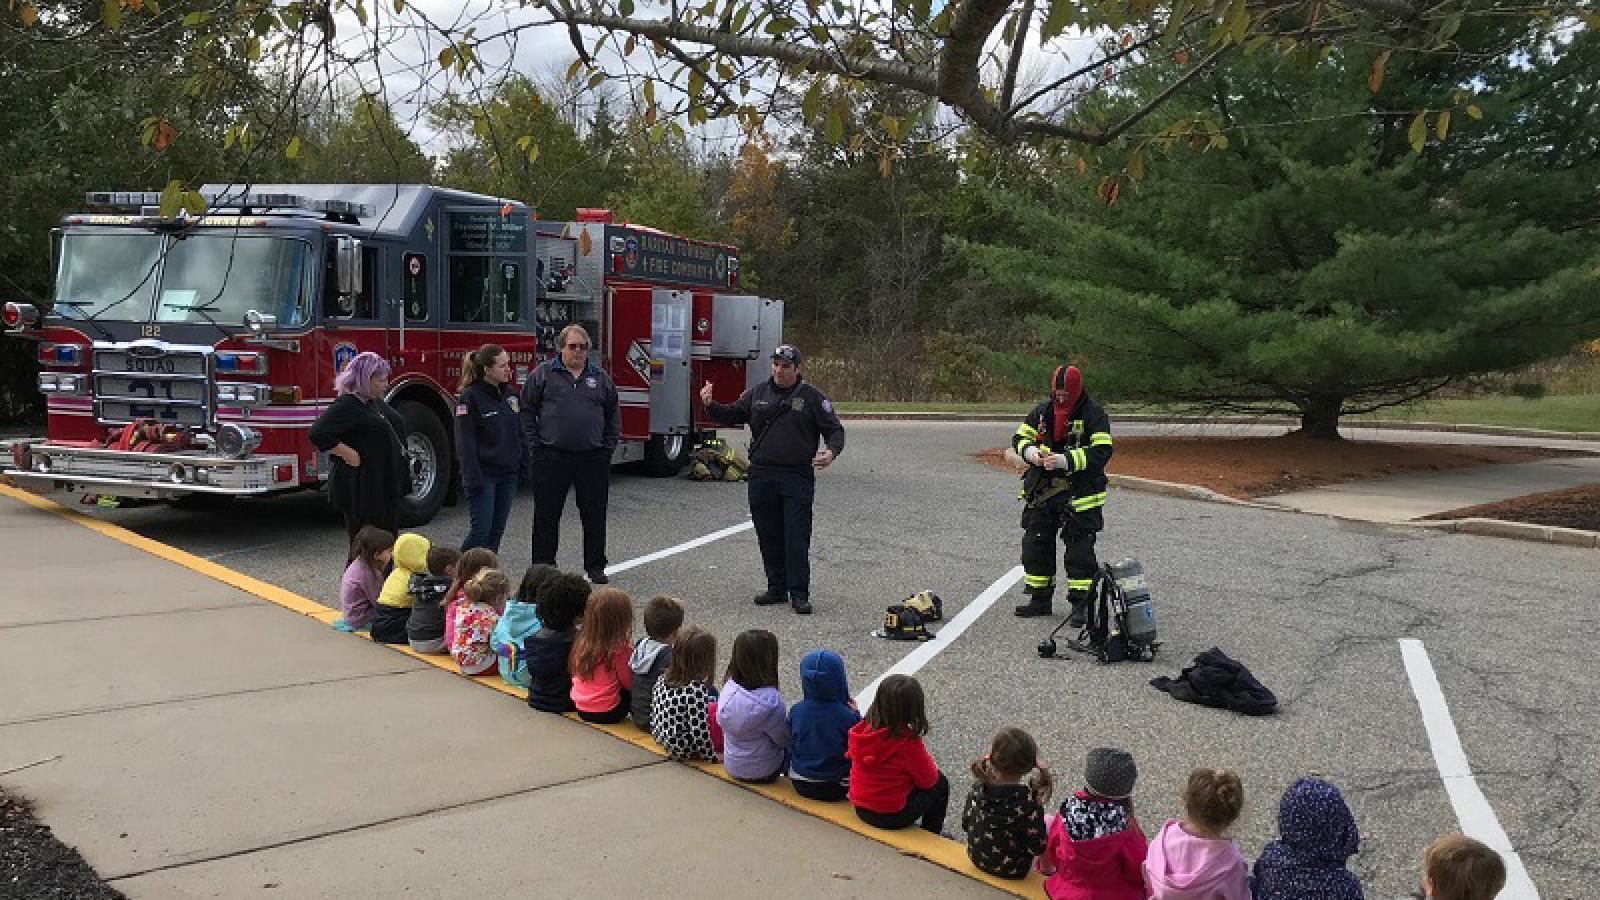 A fireman educates the children on fire safety and a tour of the fire truck.